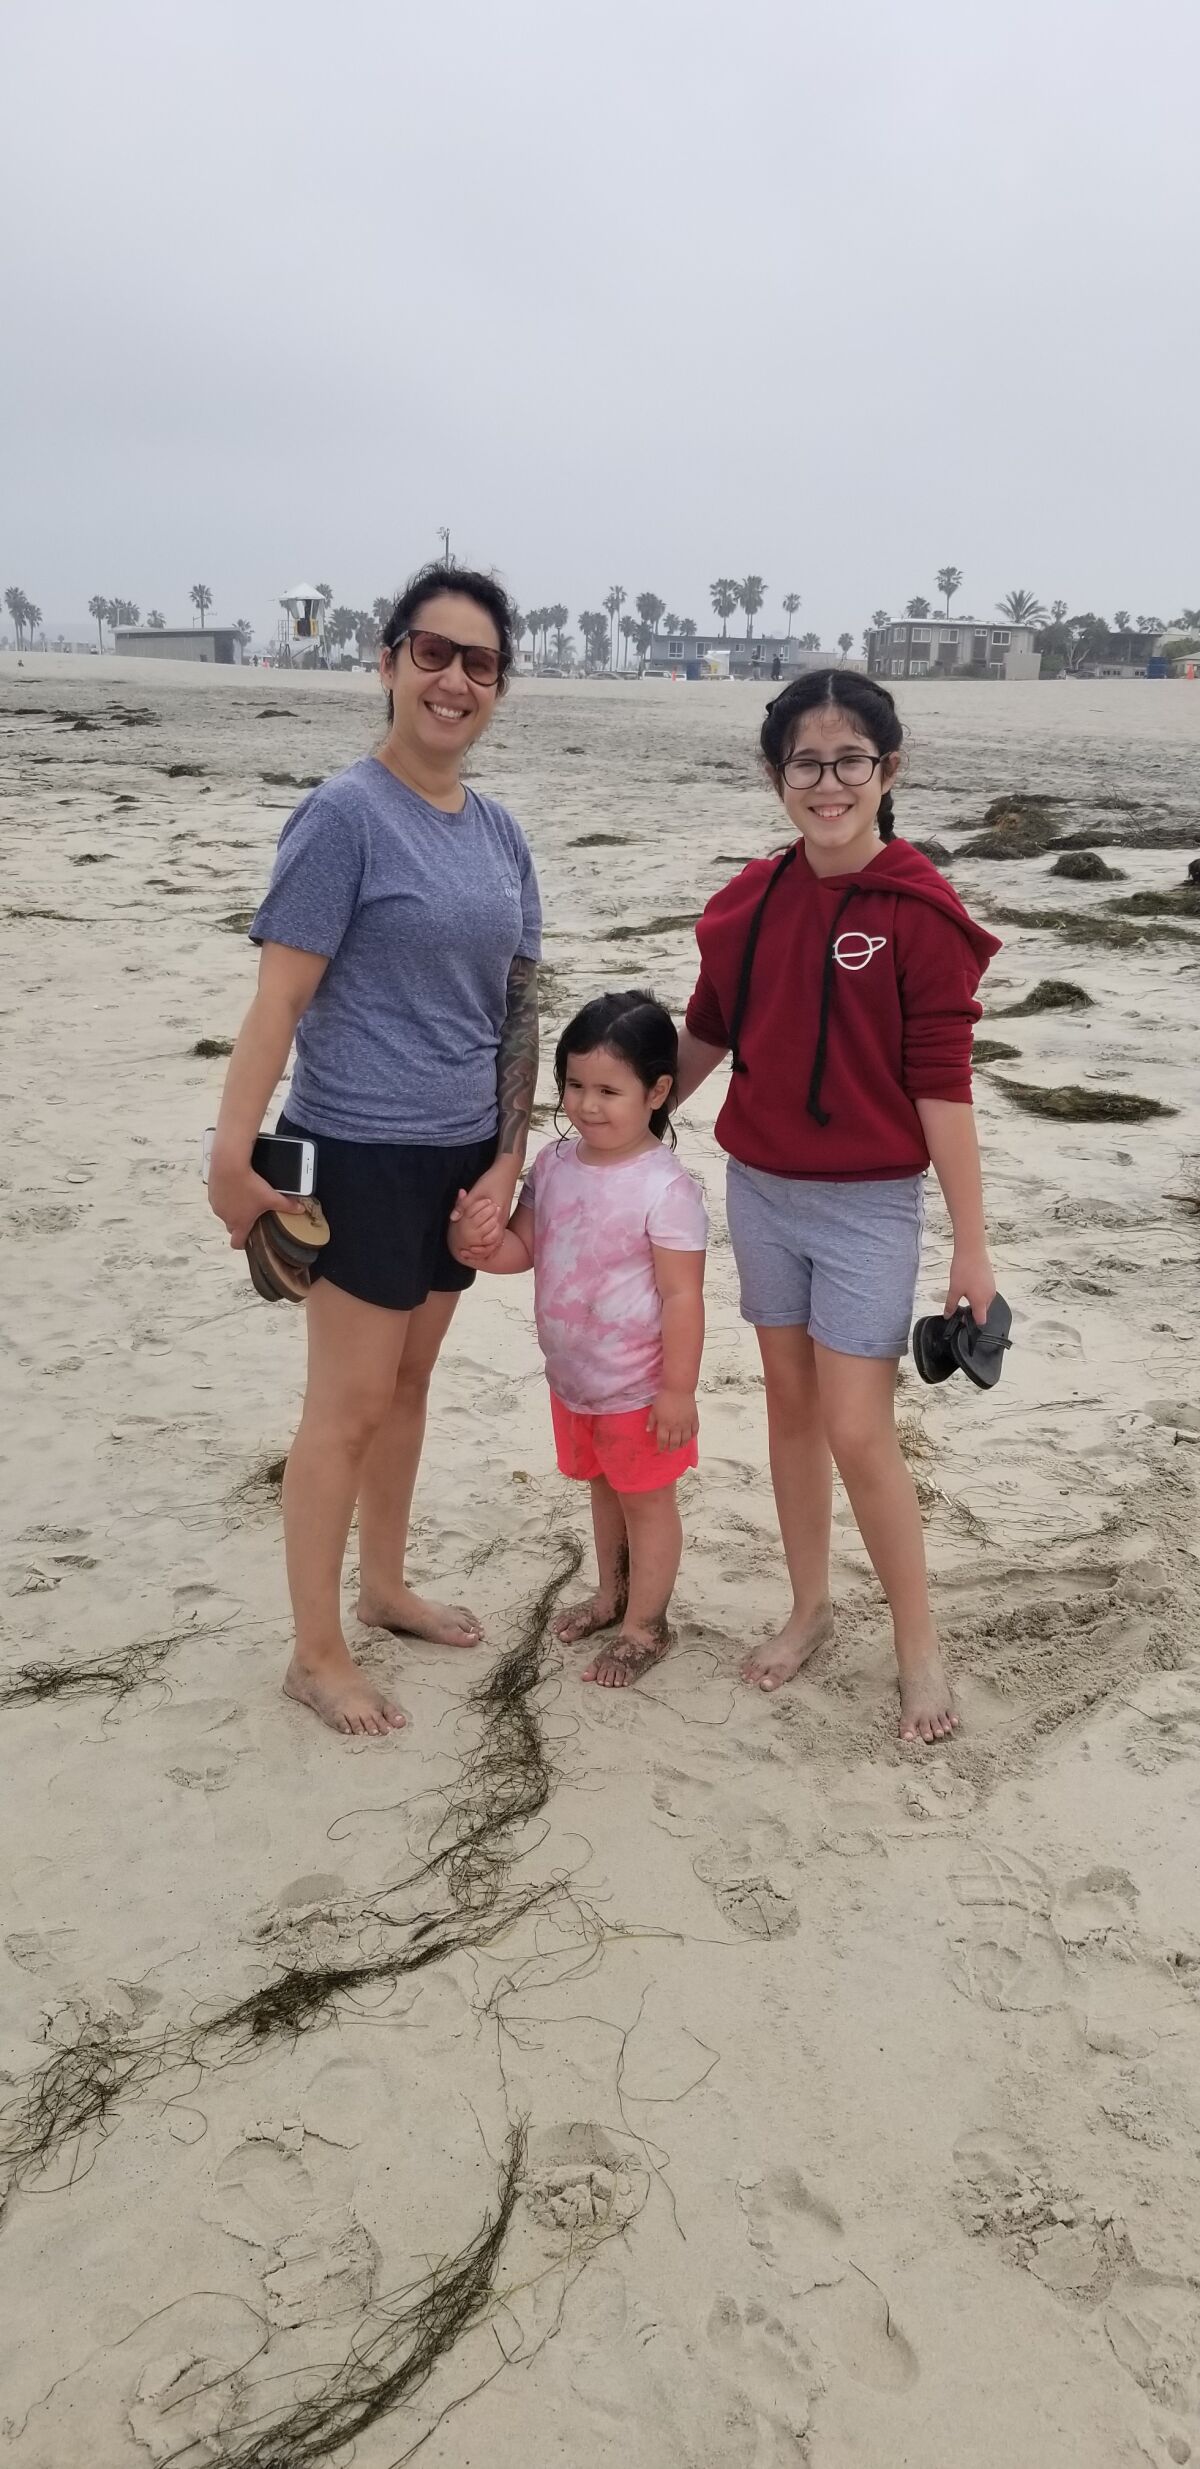 Emy Mills, on a walk with her daughters Eloise and Ema in Ocean Beach, said, “Honestly, I feel safer being out here at the beach than at a grocery store.”